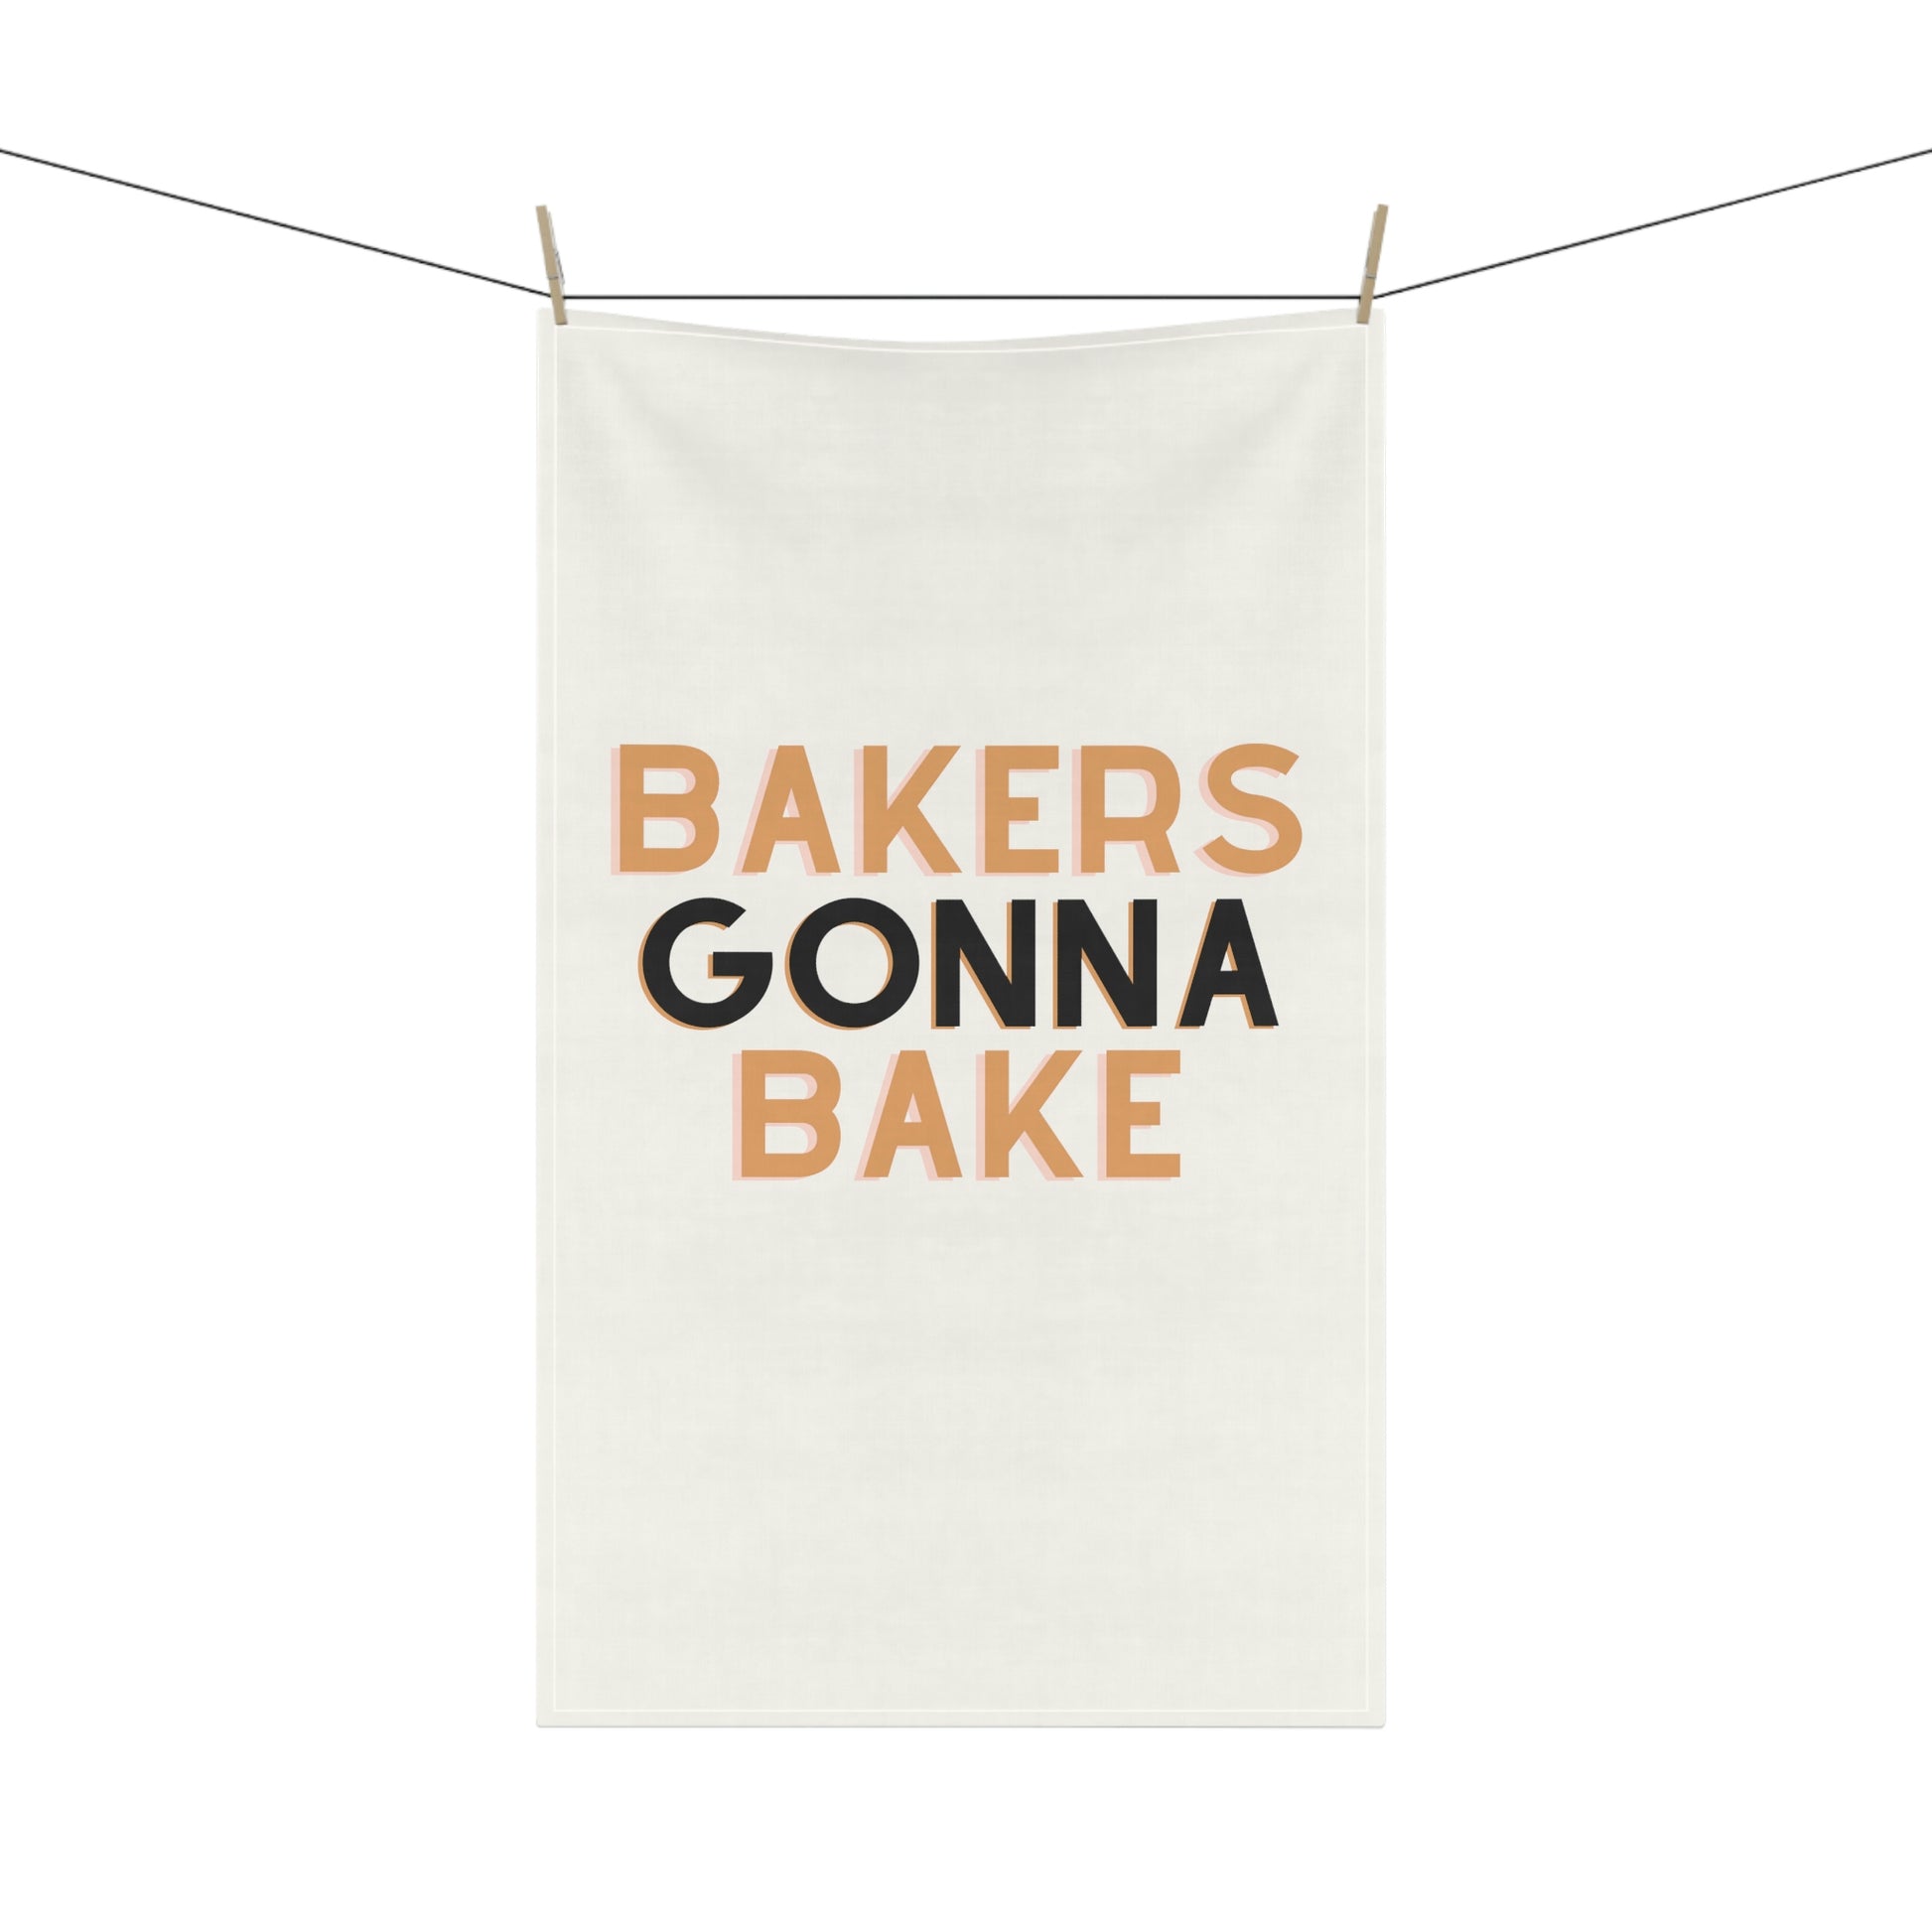 Folded cotton twill kitchen towel with baking motivational quote.